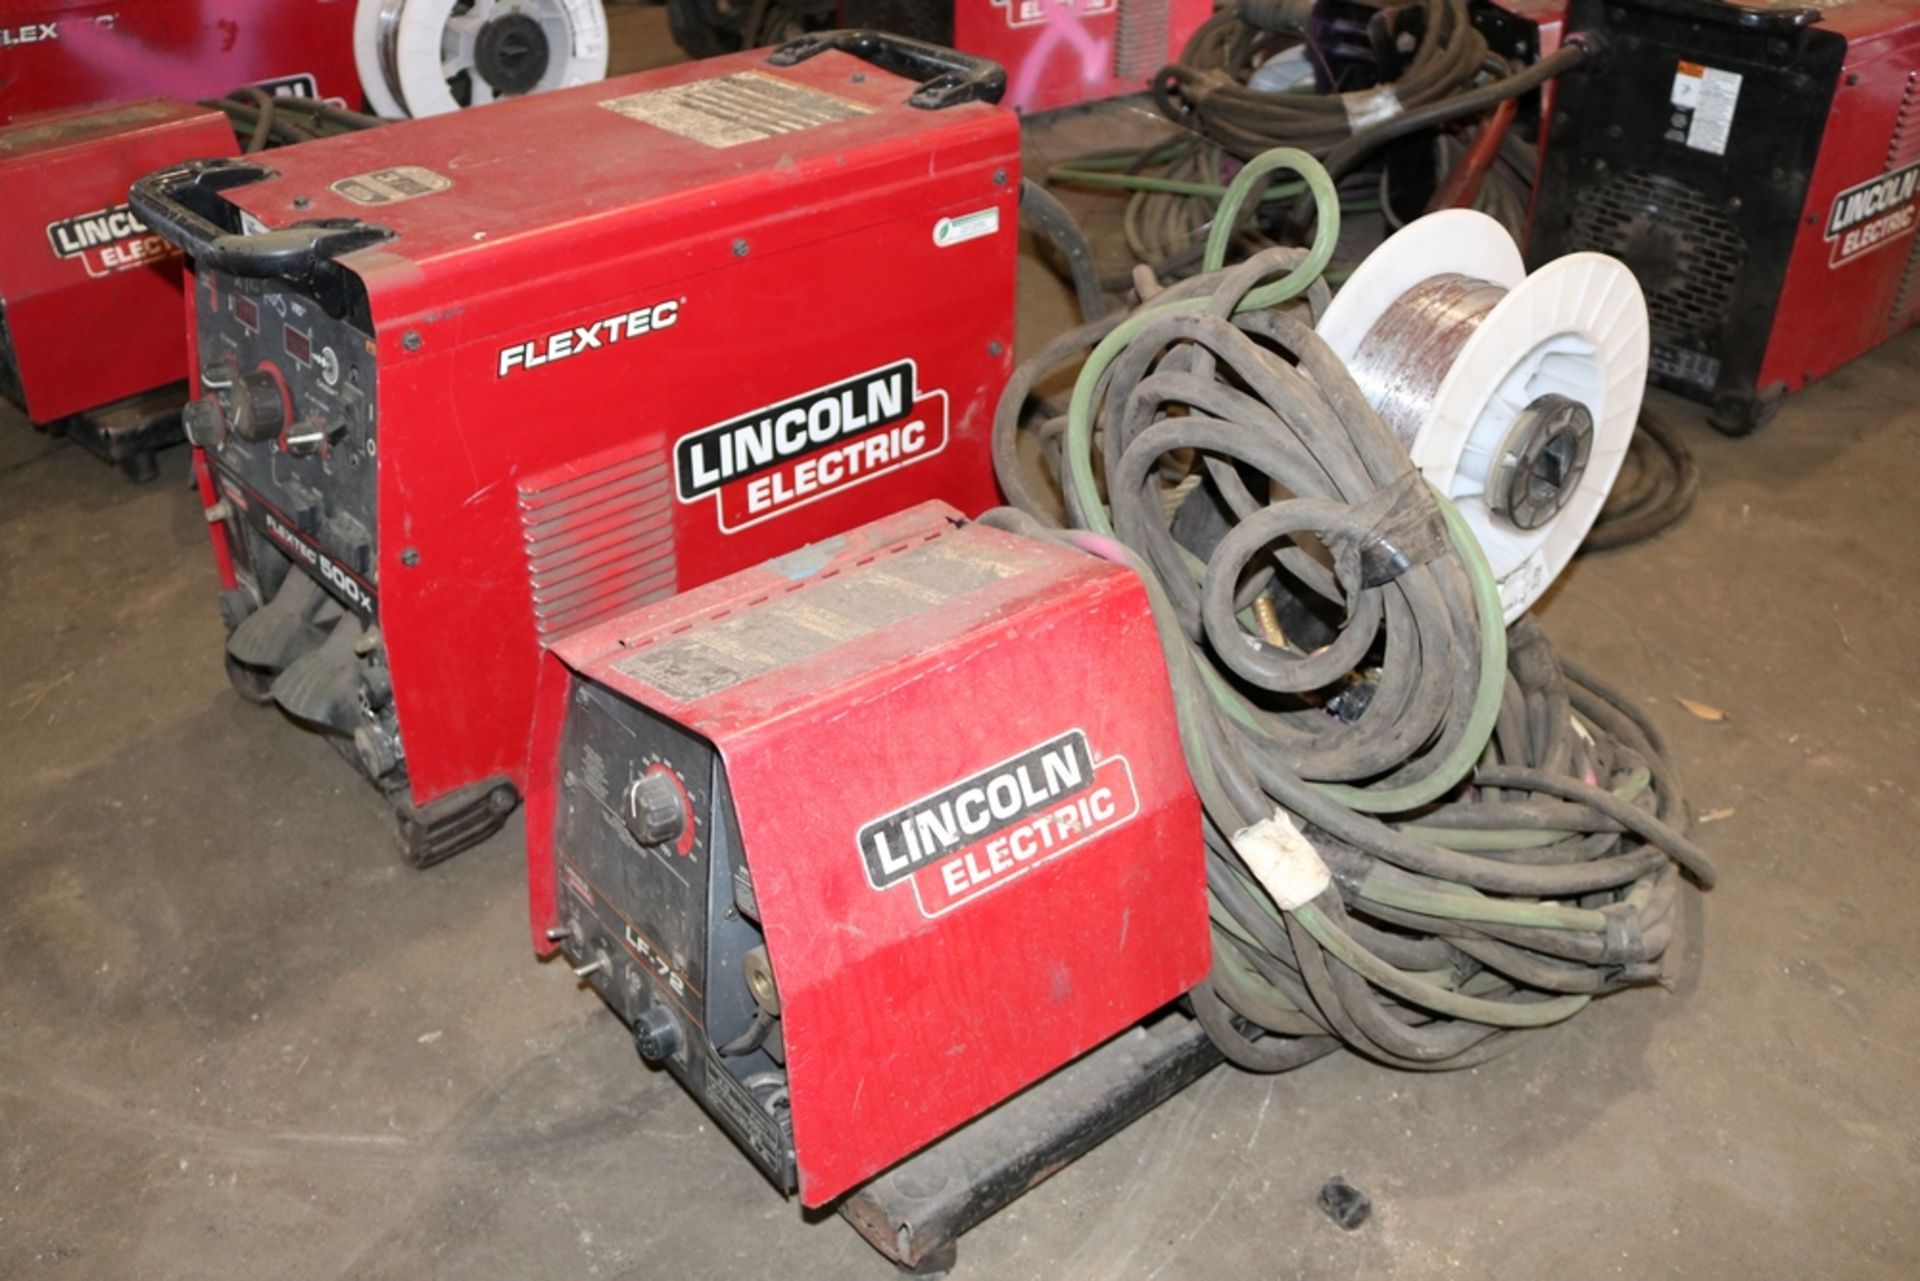 2020 Lincoln Electric Flextec 500X Welder with LF-72 Feeder - Image 3 of 8